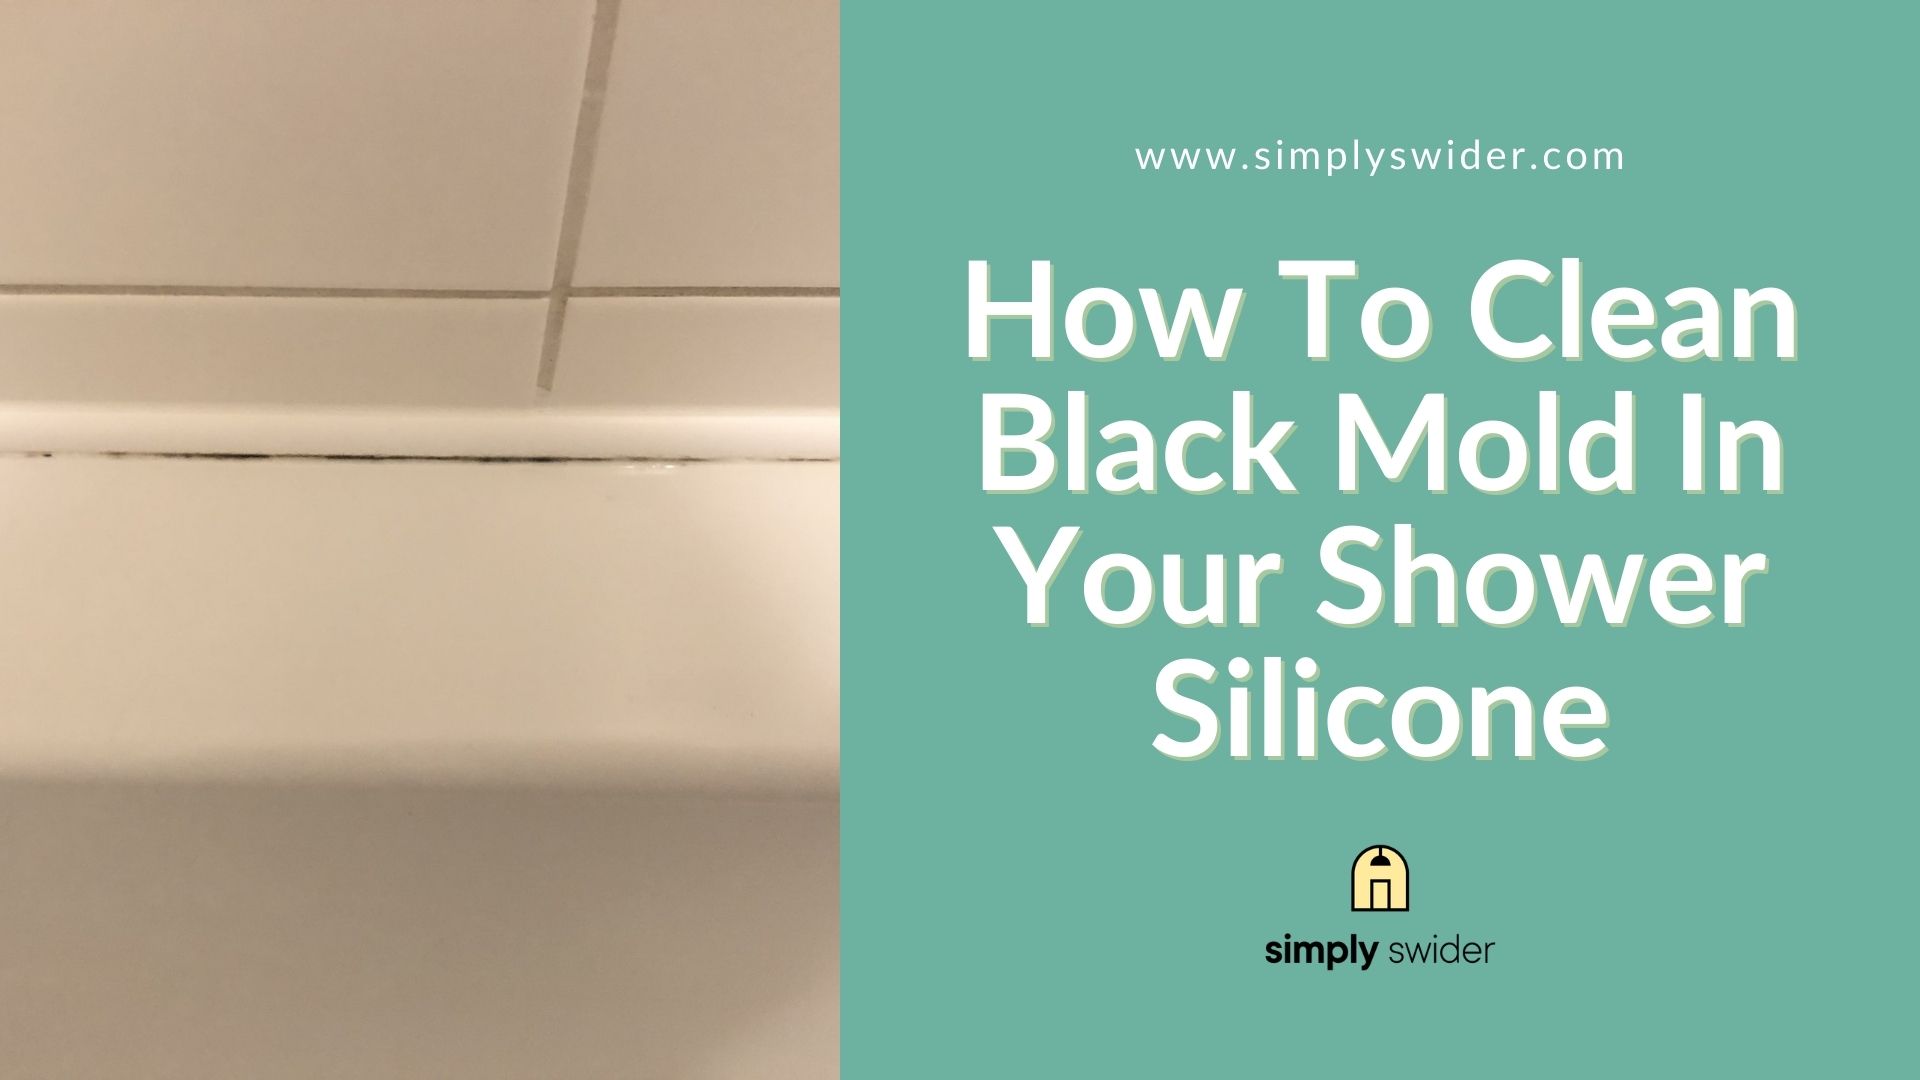 How To Clean Black Mold In Your Shower Silicone